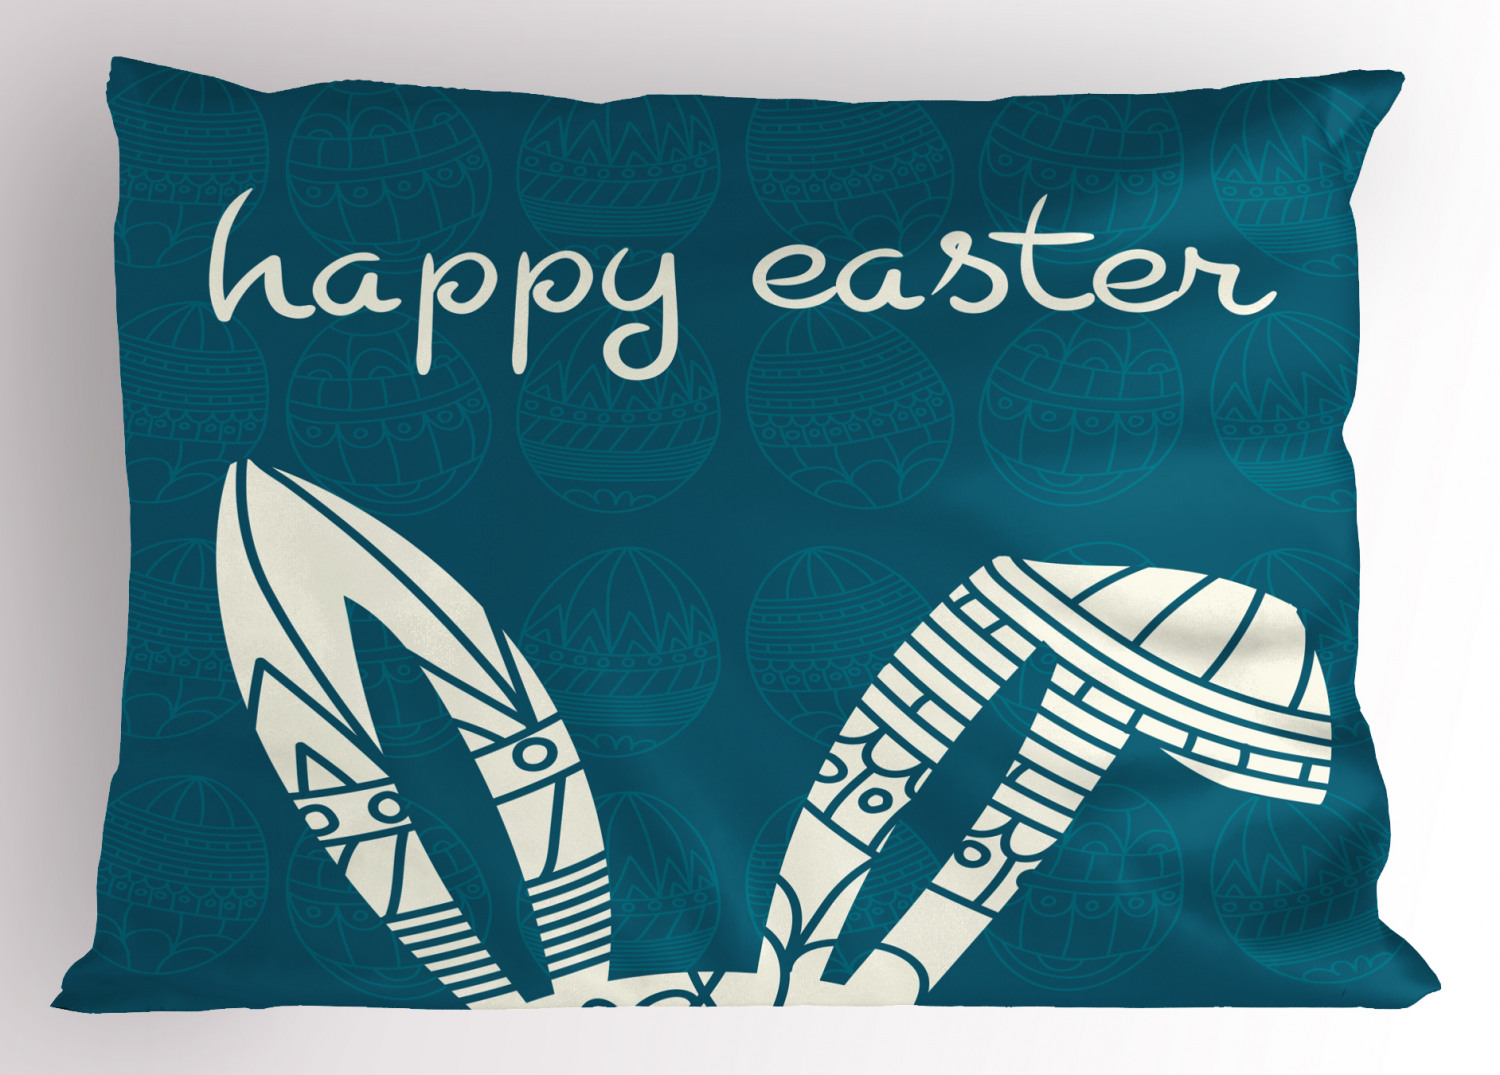 Details about   Easter Pillow Sham Decorative Pillowcase 3 Sizes Available for Bedroom Decor 